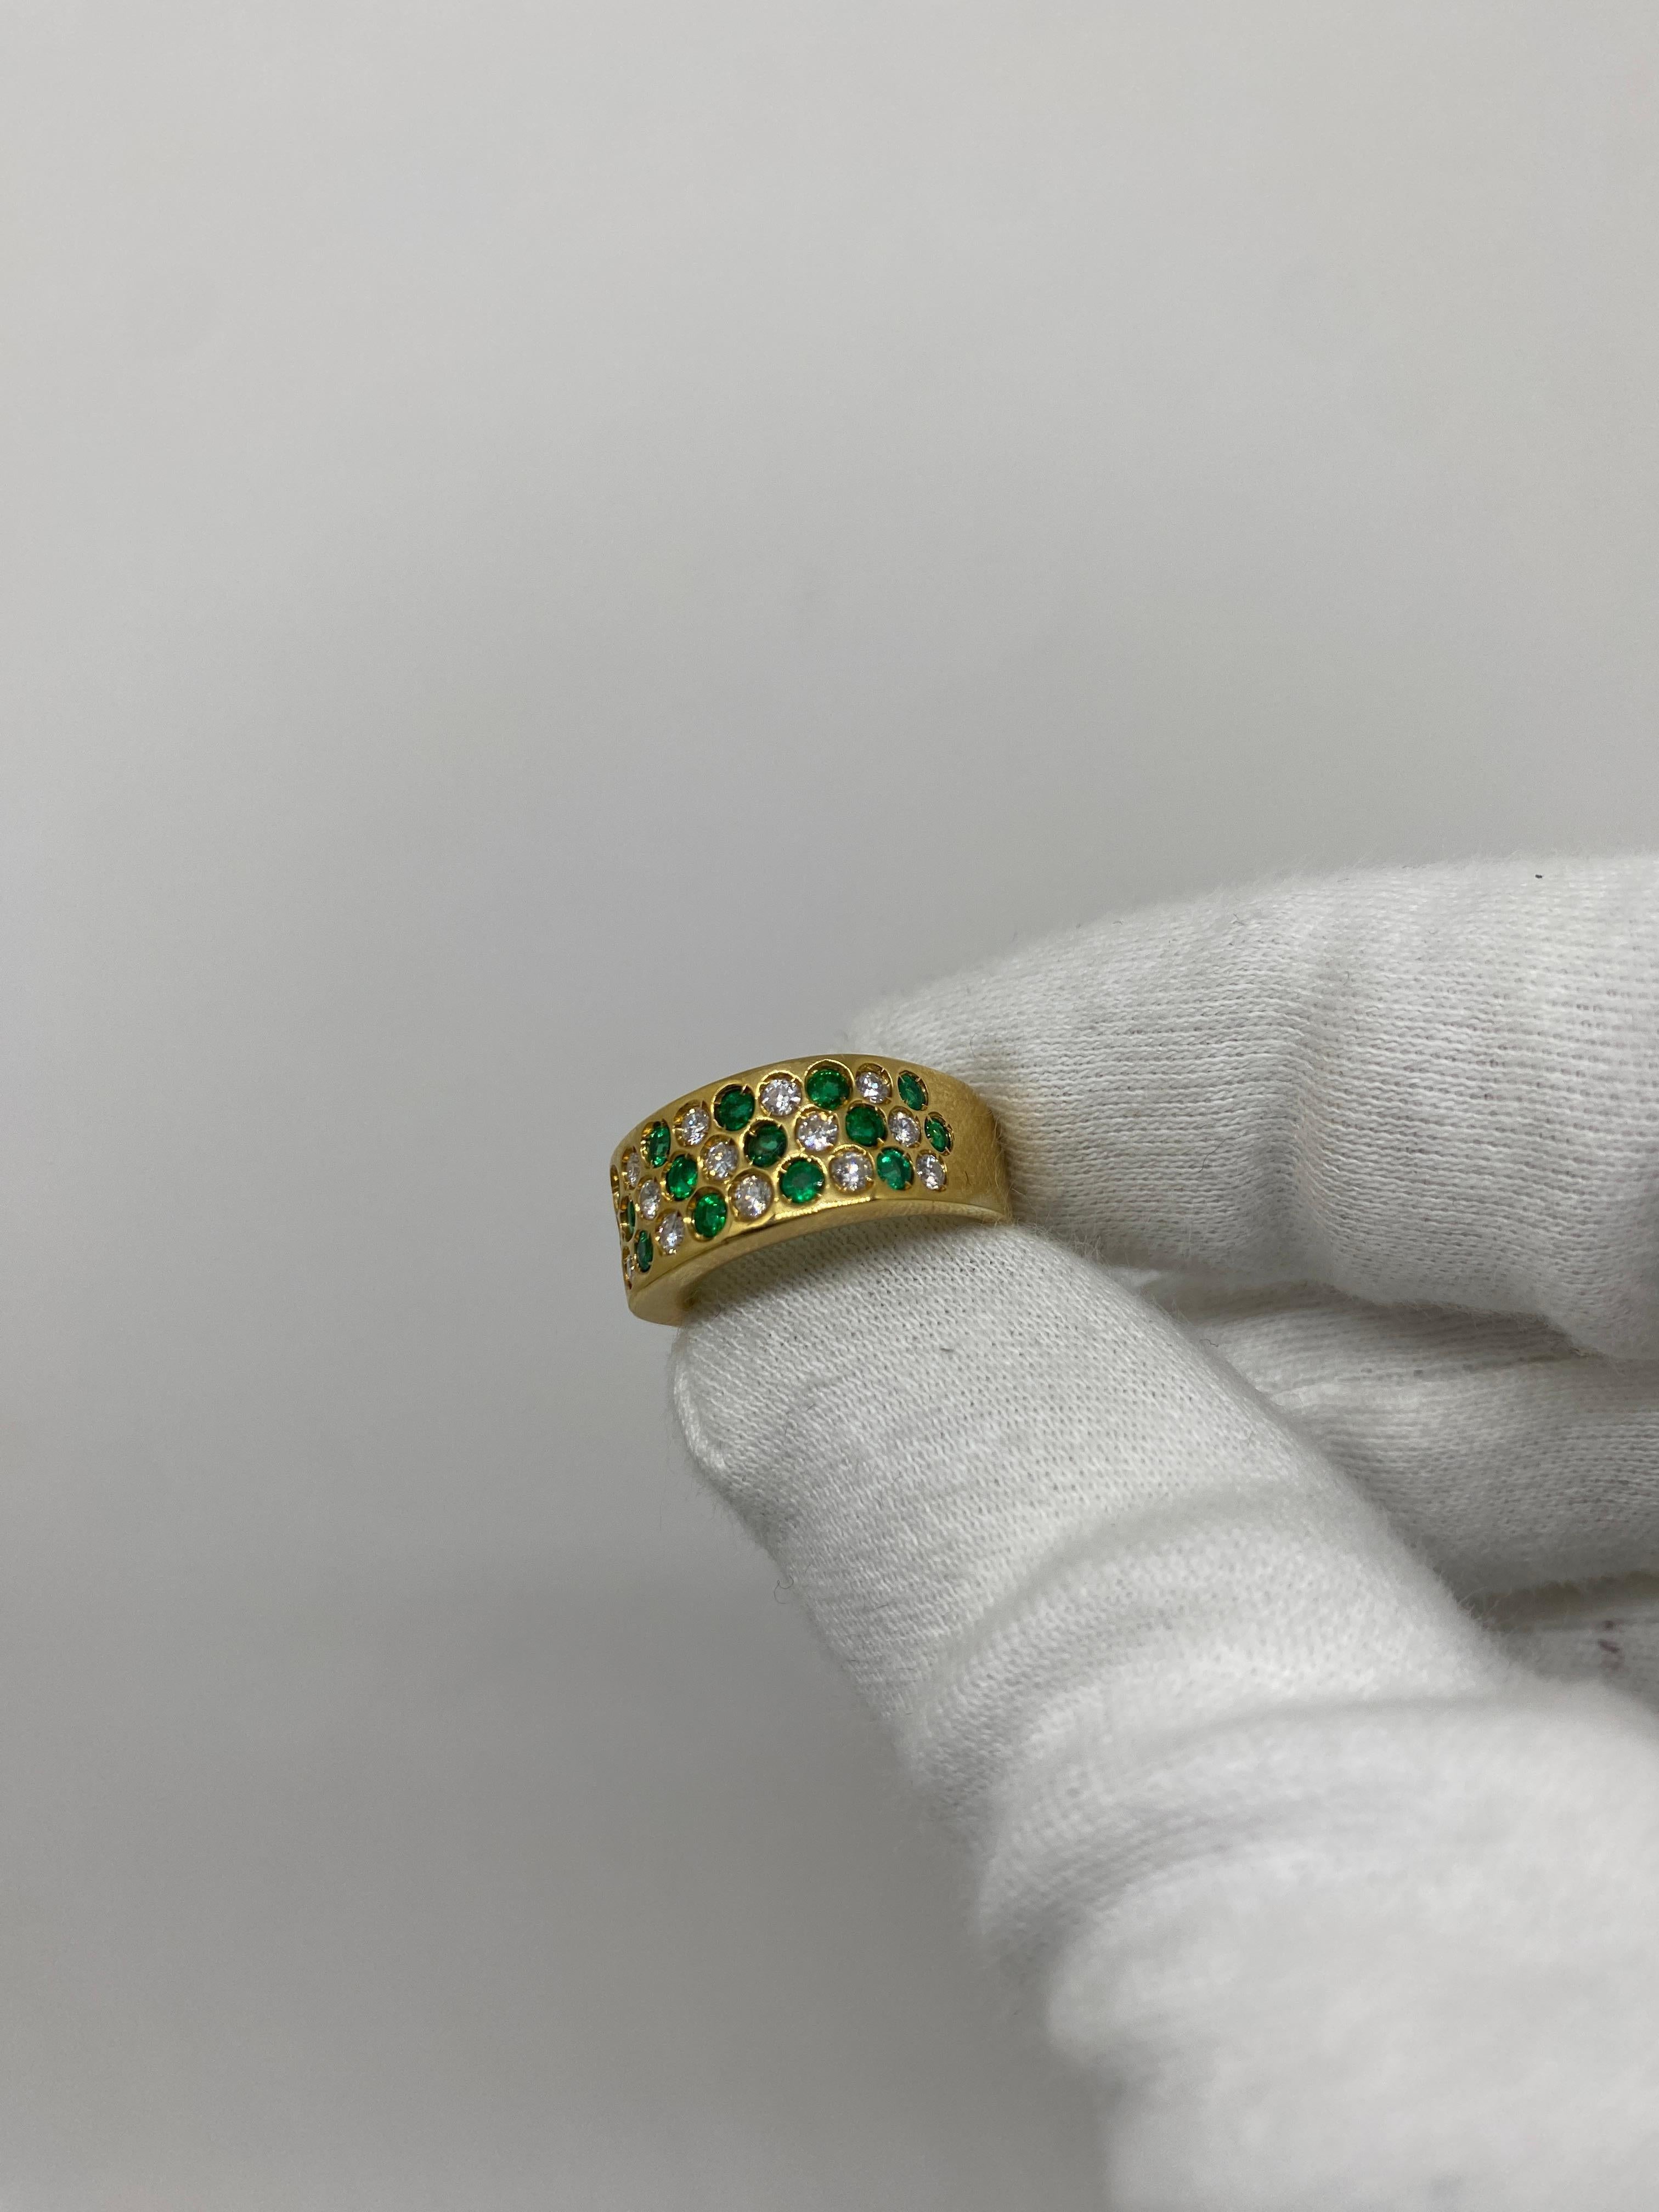 Ring made of 18kt yellow gold with natural brilliant-cut emeralds ct.0.51 and natural white brilliant-cut diamonds ct.0.55

Welcome to our jewelry collection, where every piece tells a story of timeless elegance and unparalleled craftsmanship. As a